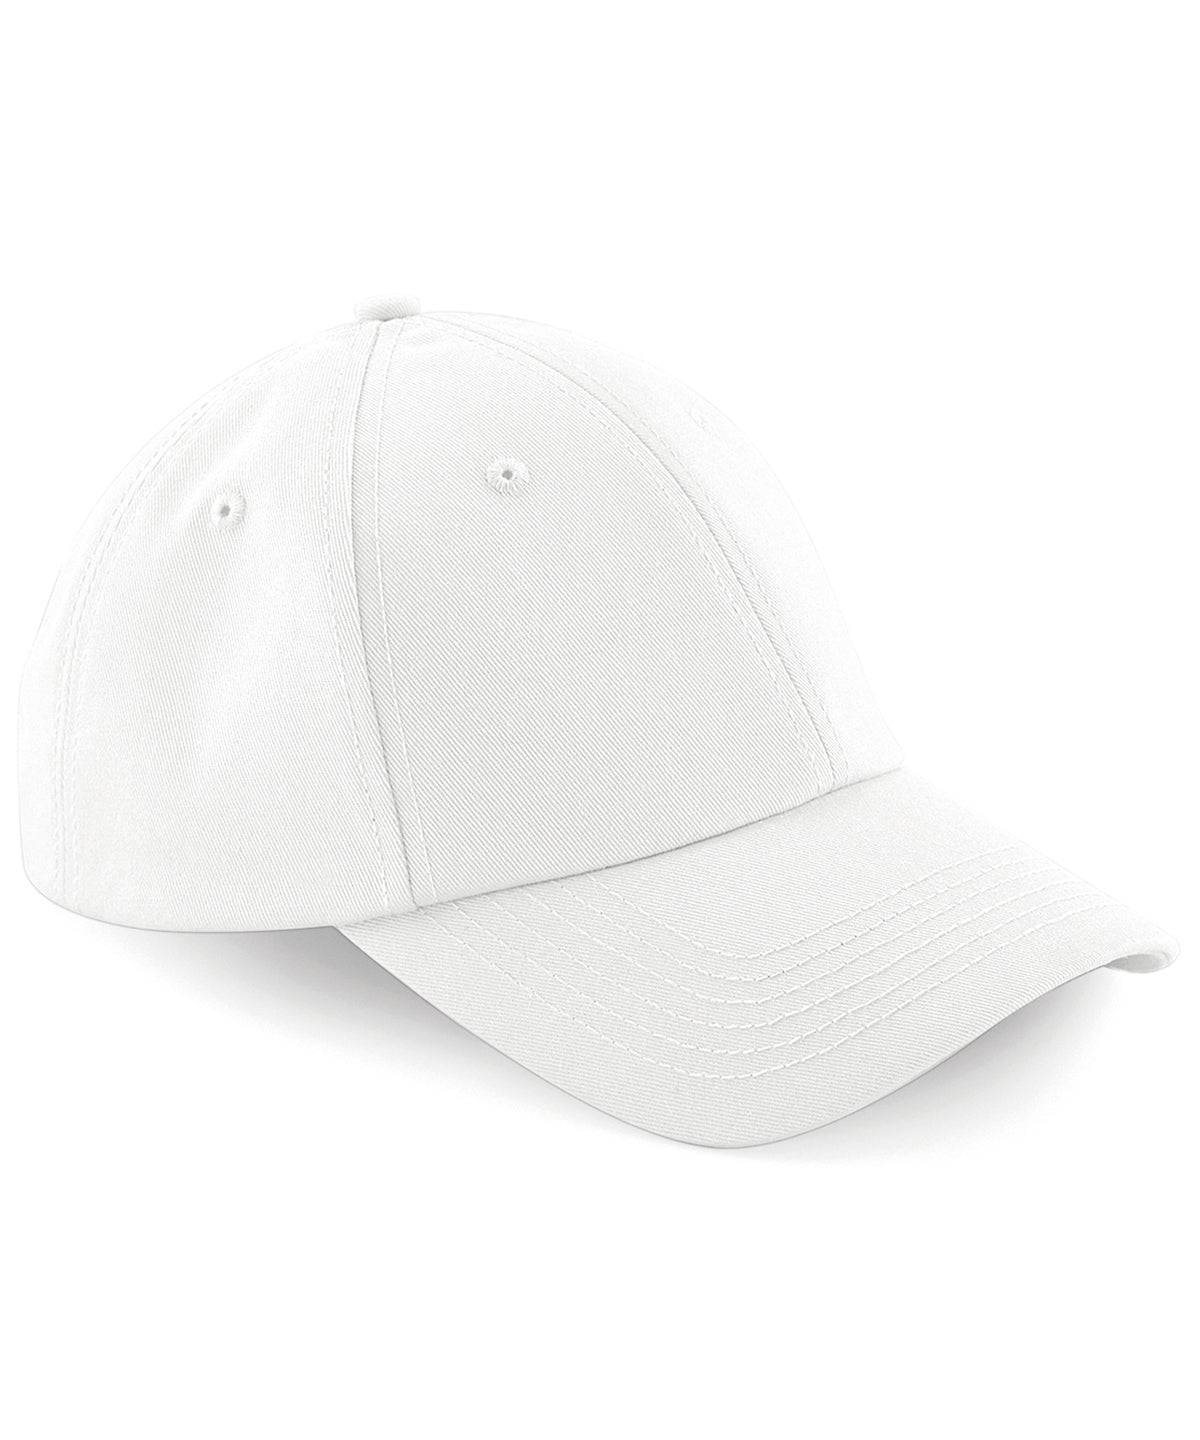 Load image into Gallery viewer, Soft White - Authentic baseball cap
